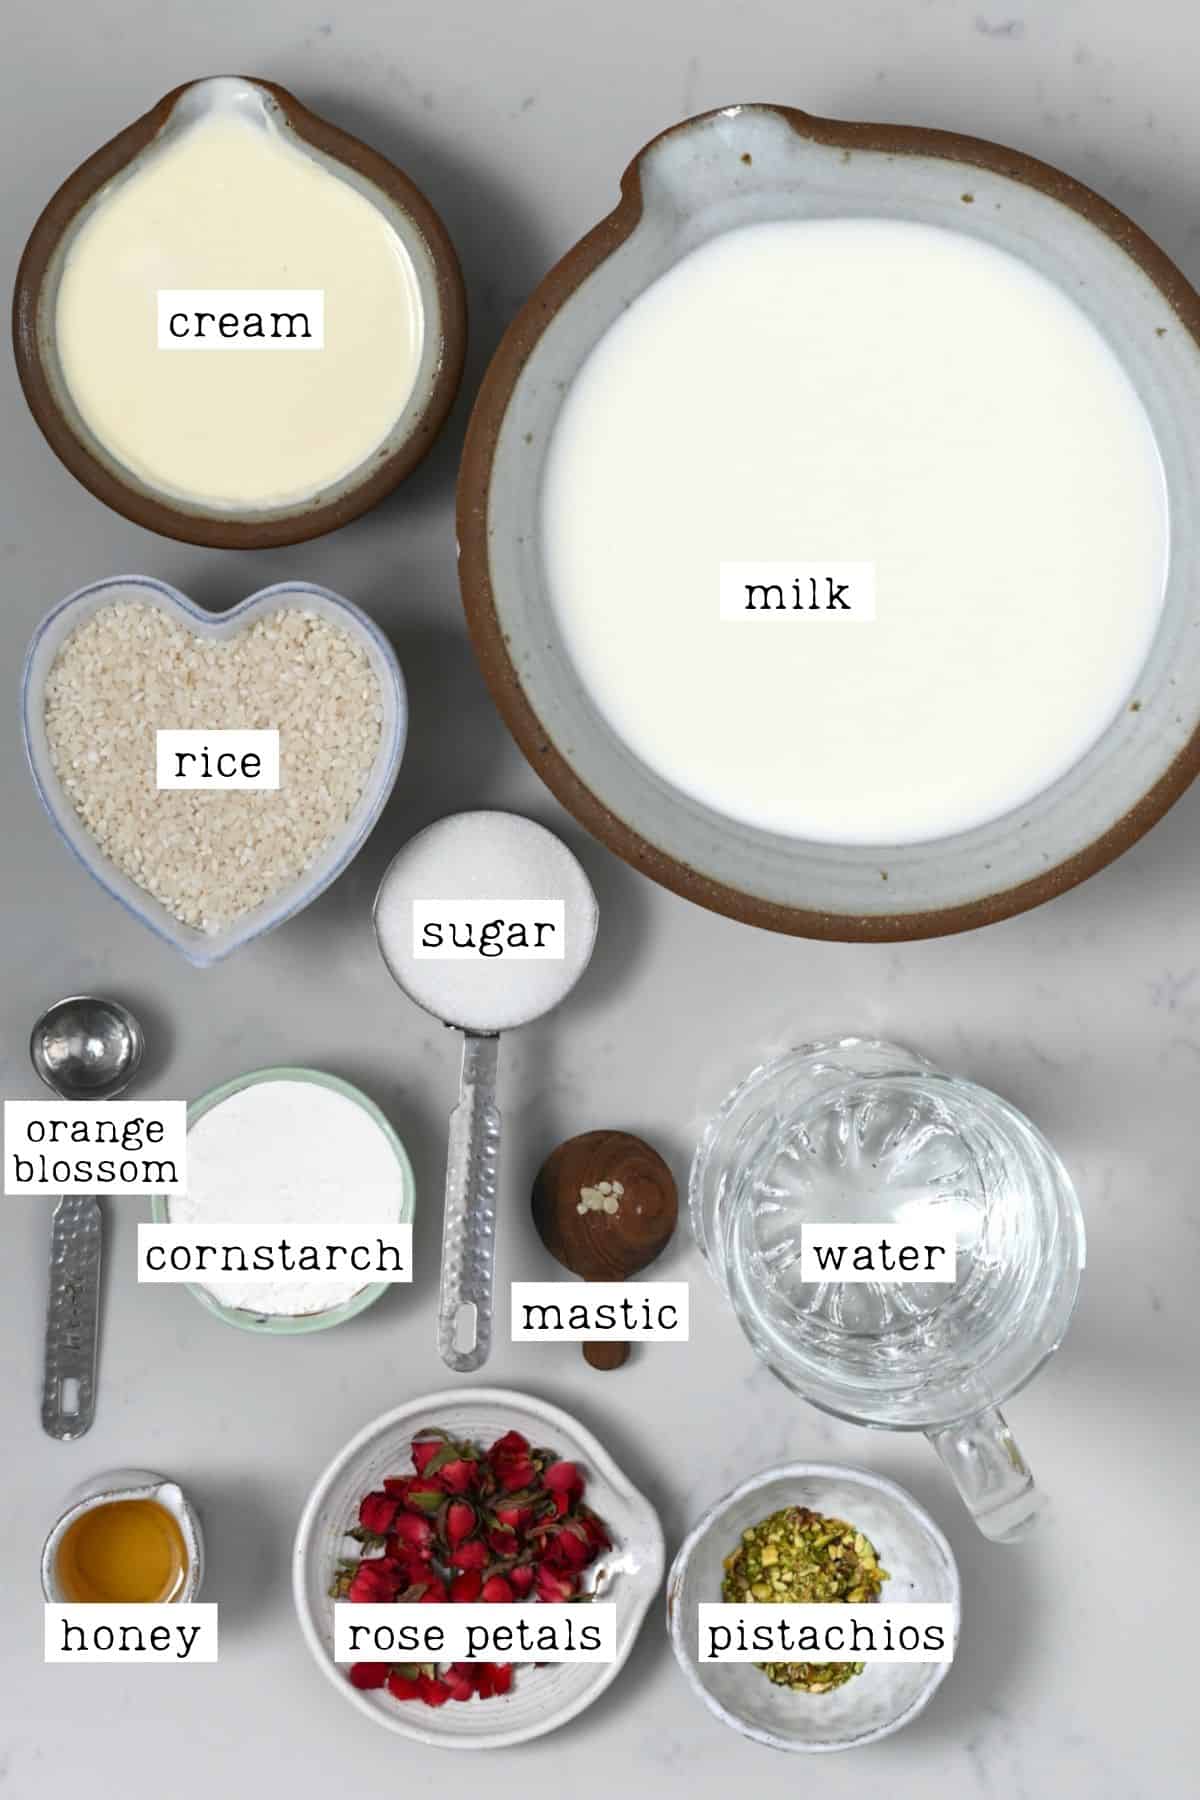 Ingredients for rice pudding